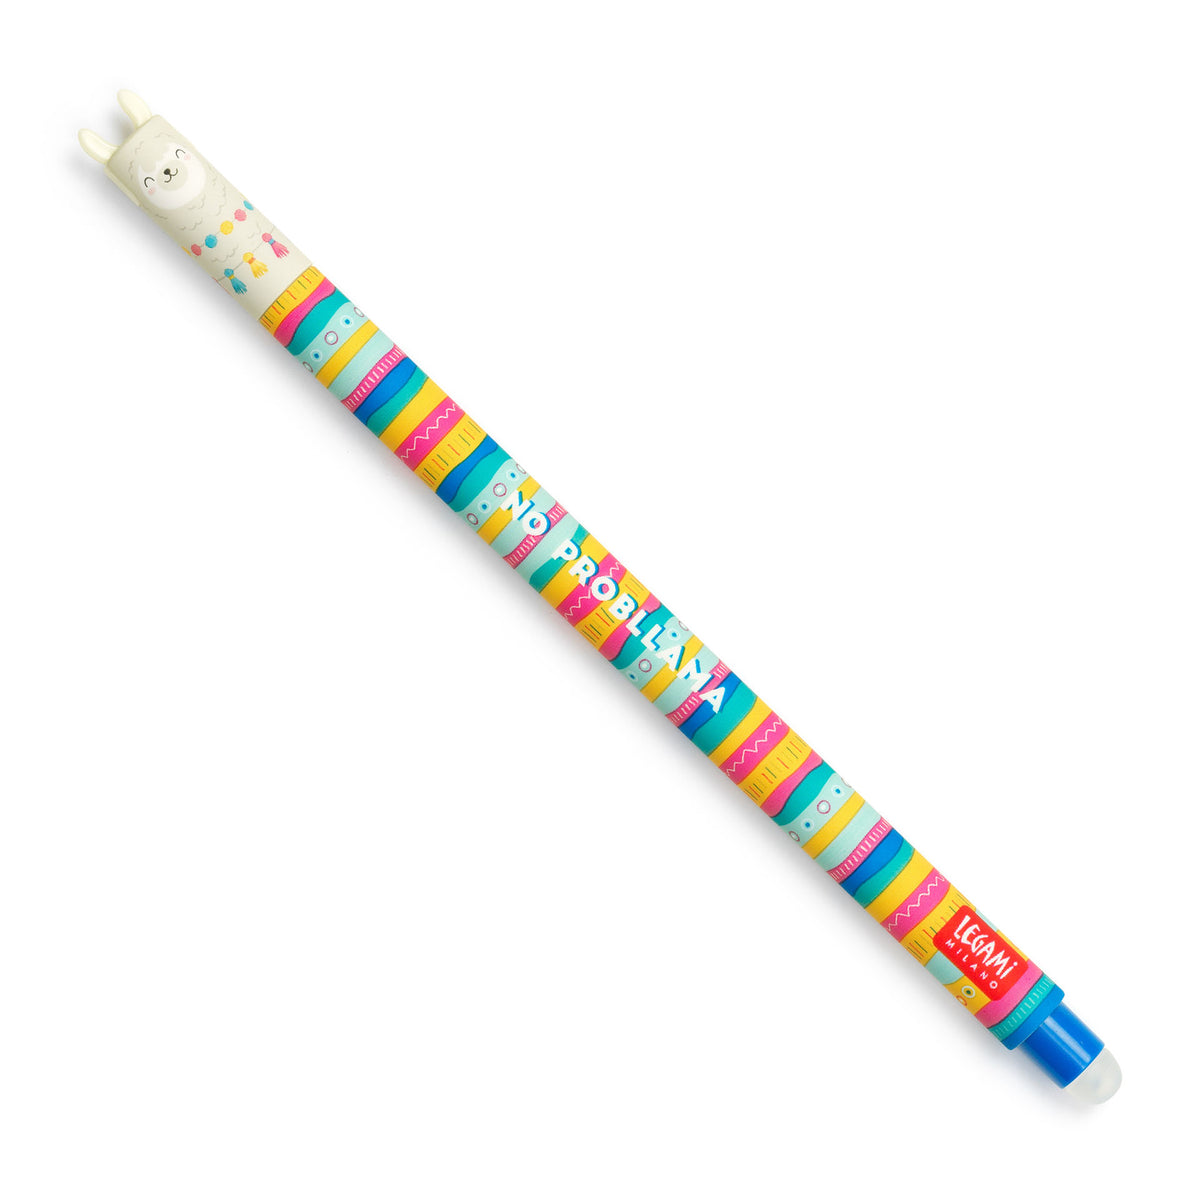 An image of a multicoloured erasable pen by Legami. The cap of the pen is like the head of a llama with llama ears formed on the top. It has an erasable ball at the other end of the pen.